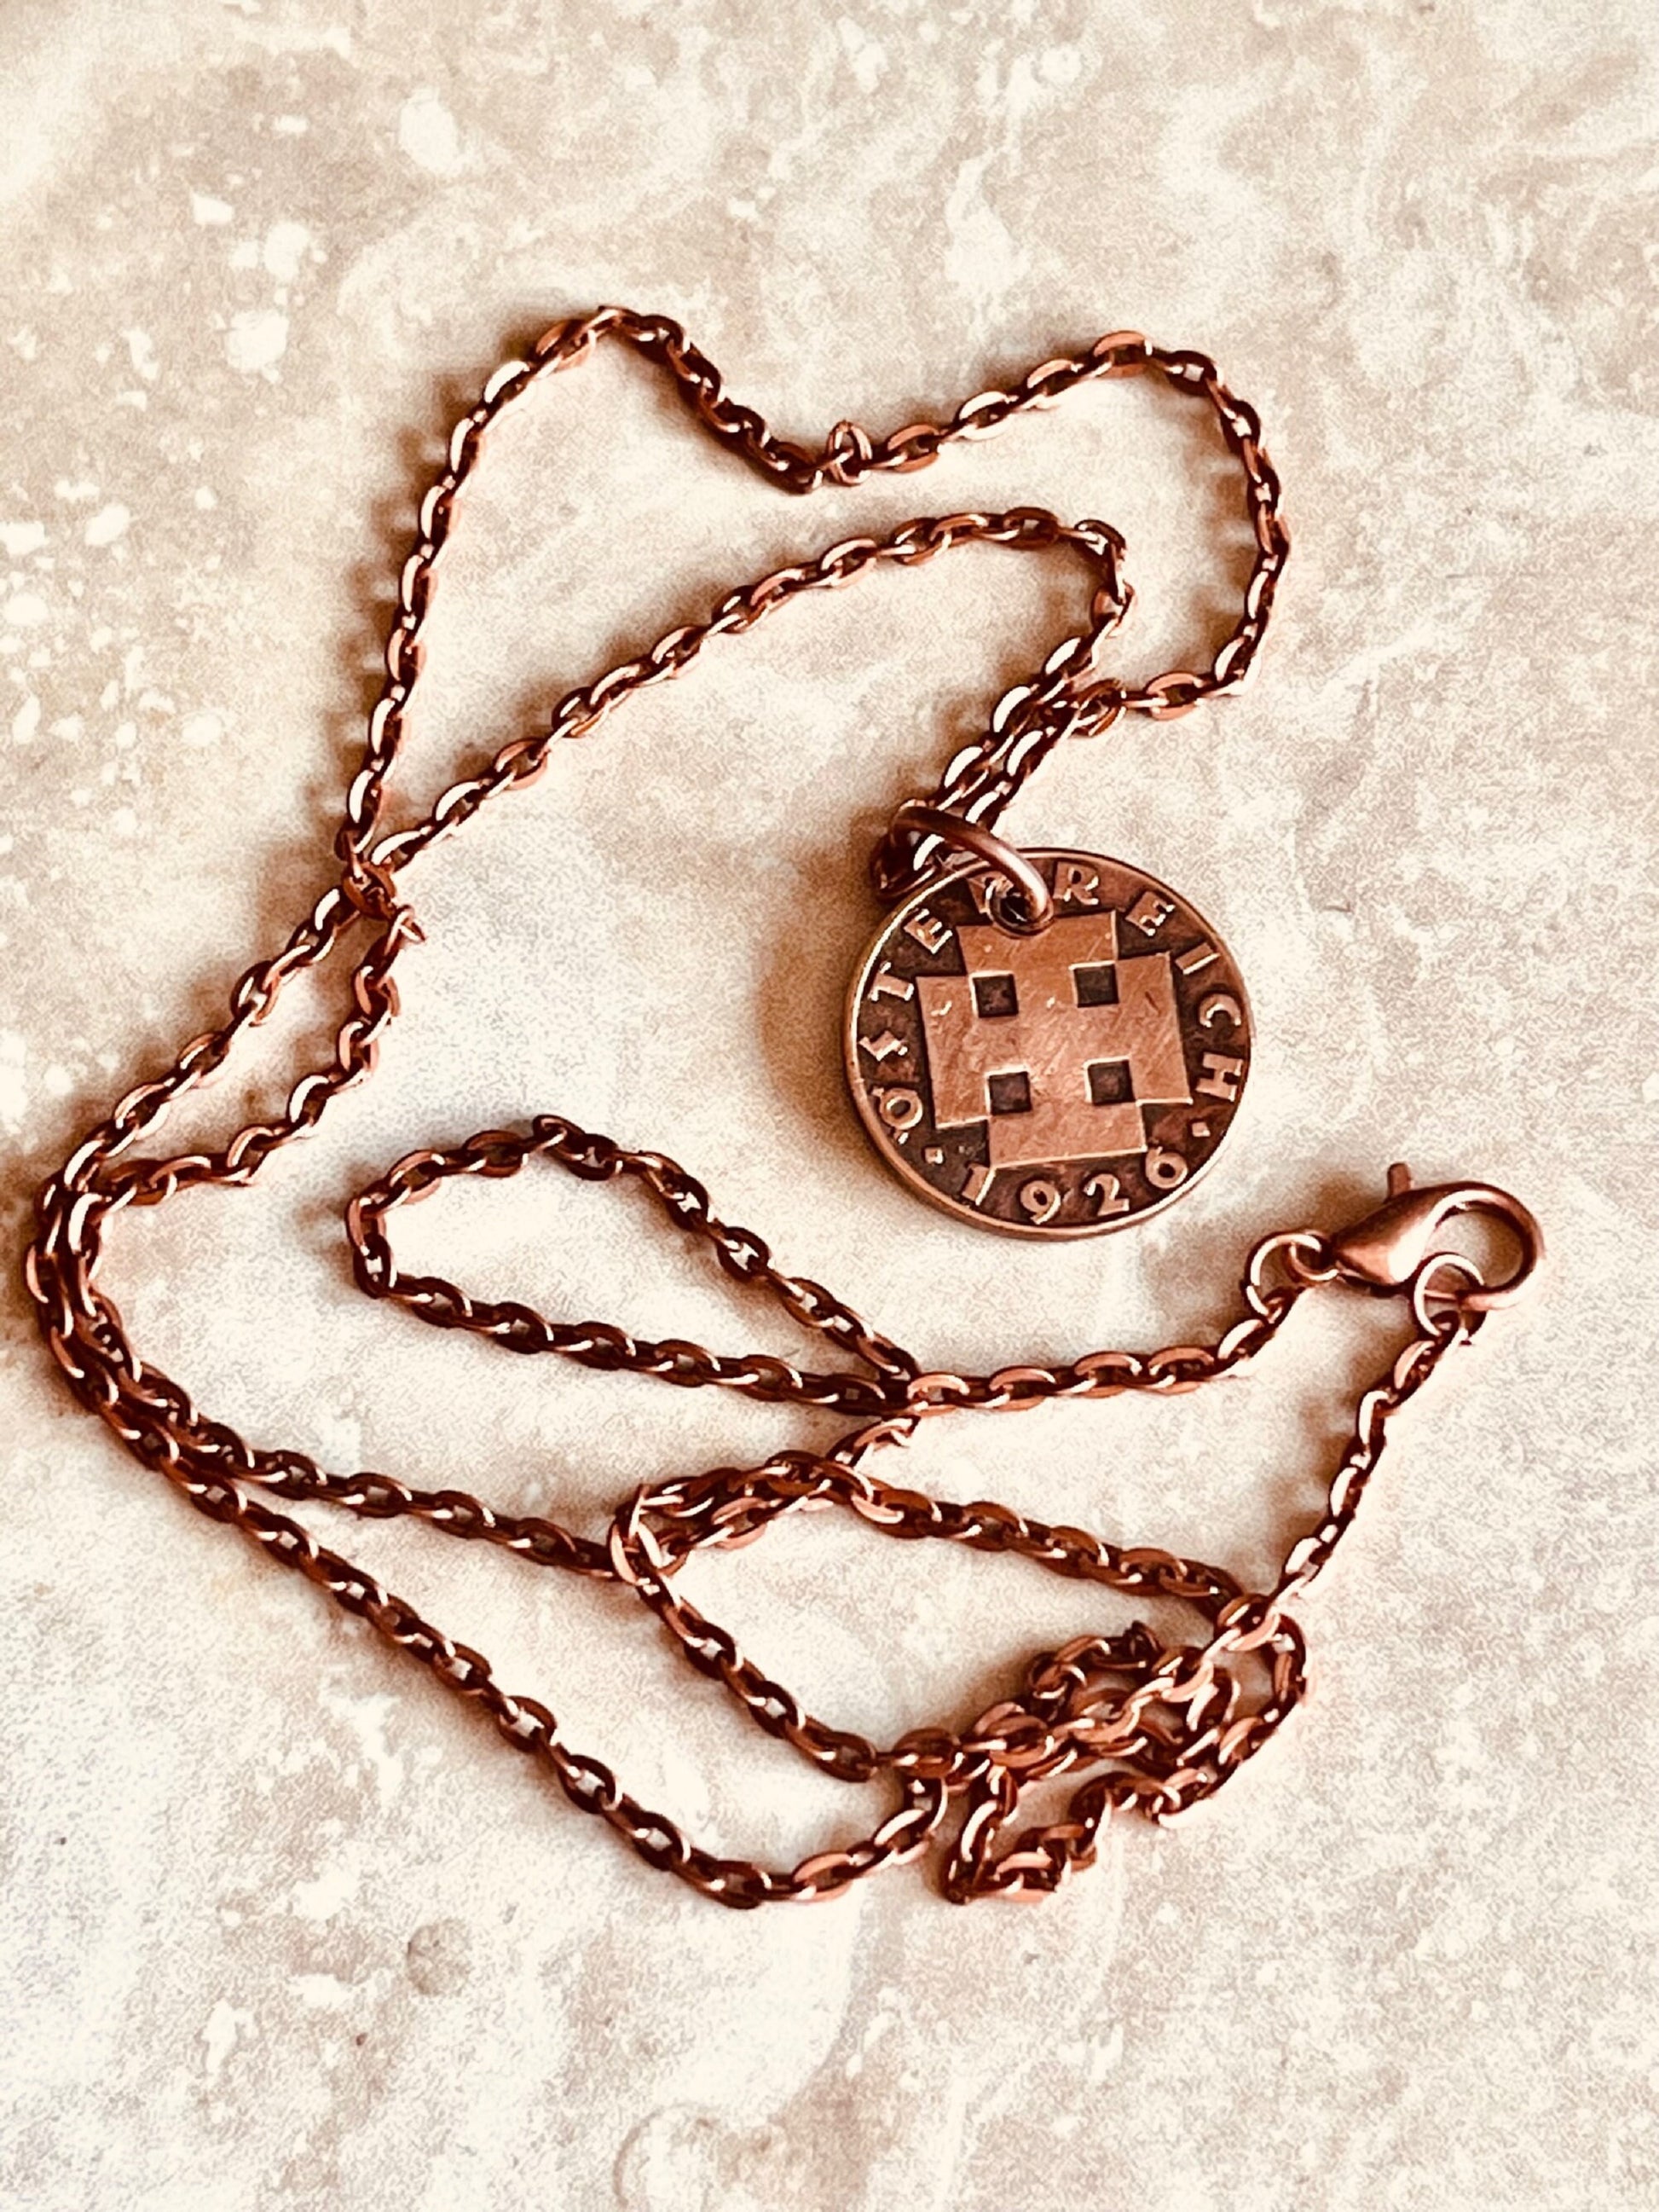 Austria 2 Groschen Austrian Pendant Personal Necklace Old Vintage Handmade Jewelry Gift Friend Charm For Him Her World Coin Collector